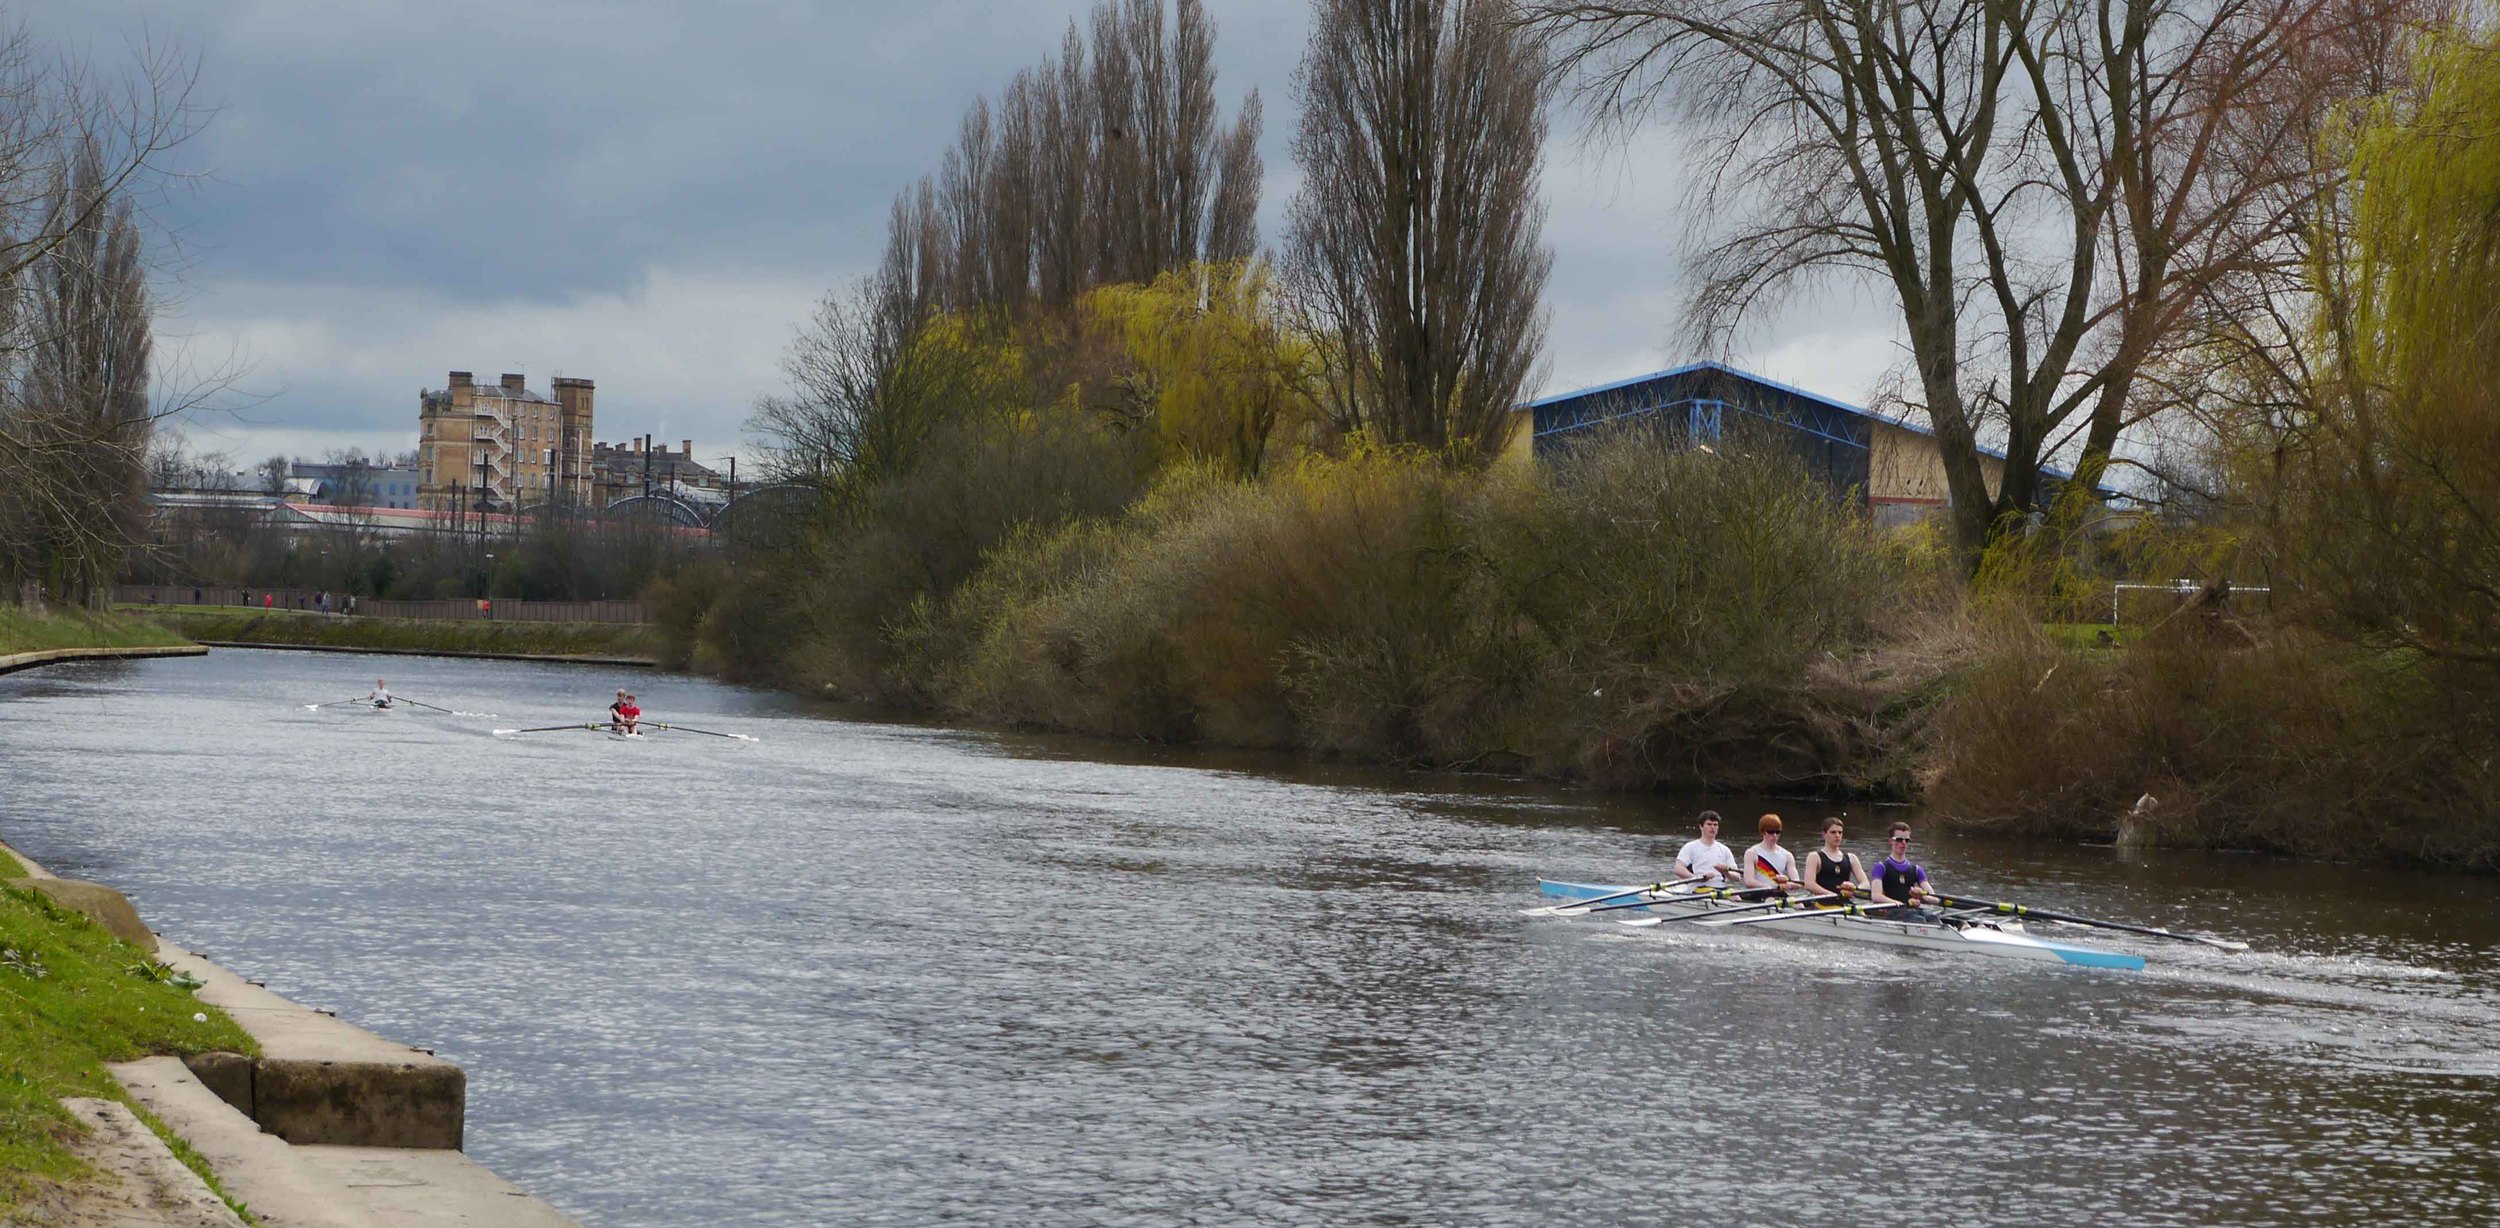 Rowers on the river Ouse in York.jpg